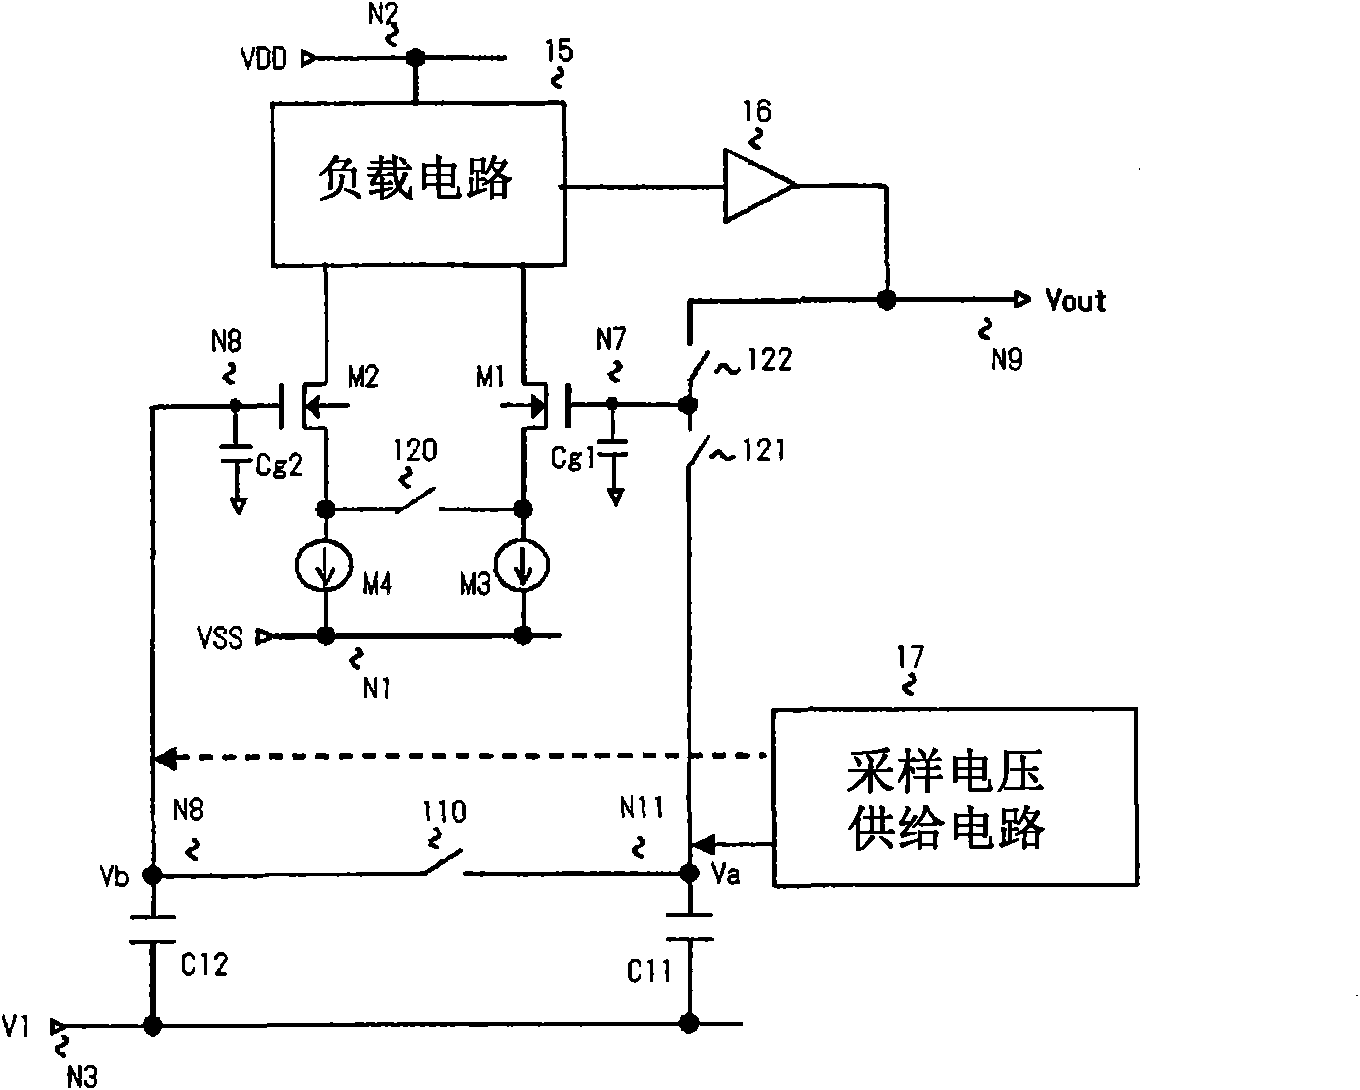 Sample and hold circuit and digital-to-analog converter circuit